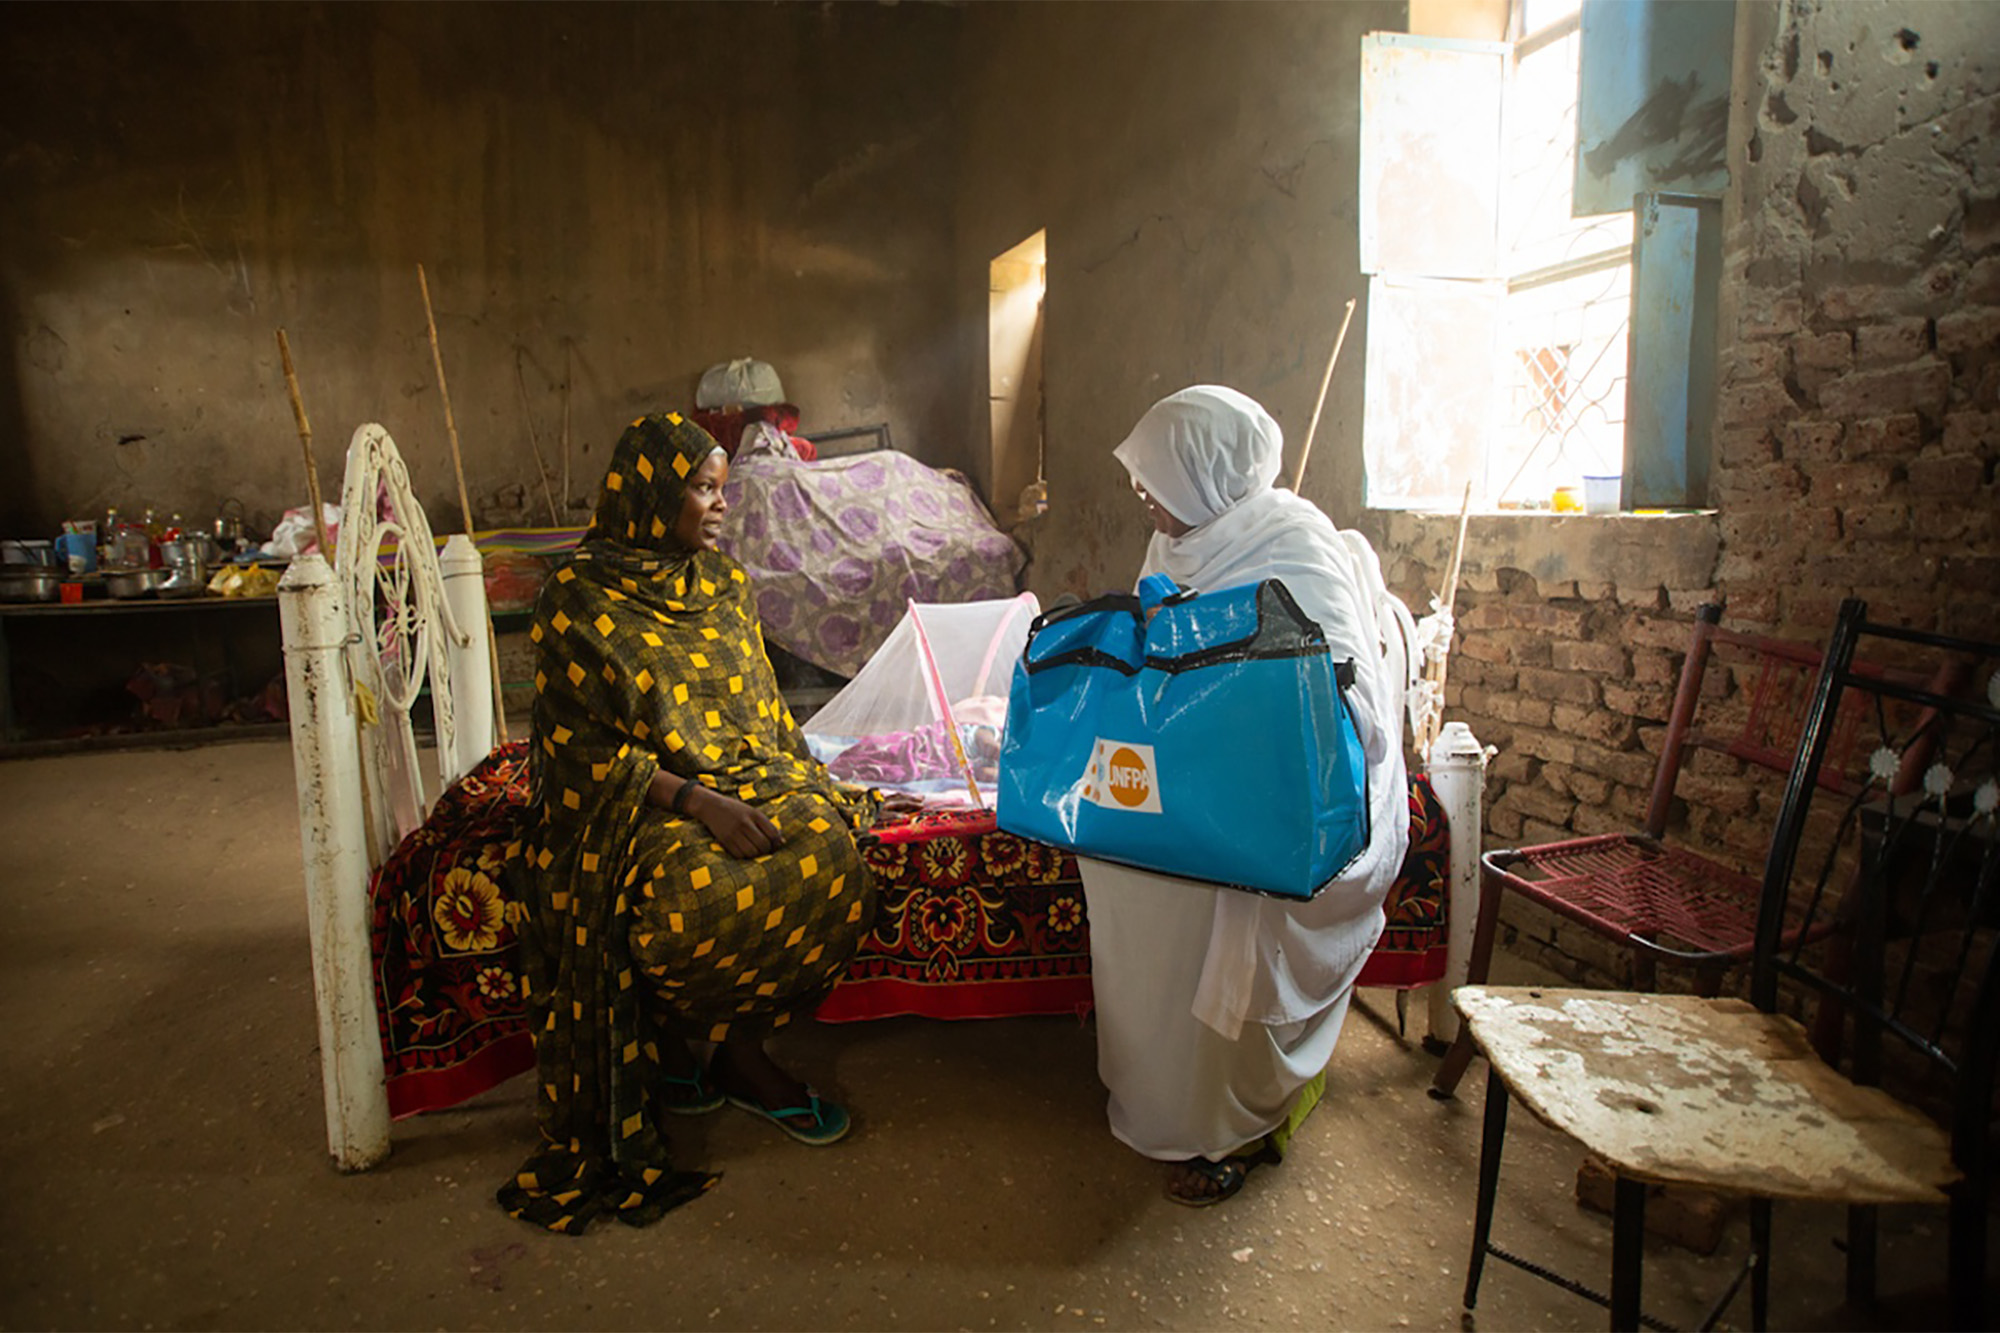 A health counselor visits a woman who has recently given birth.